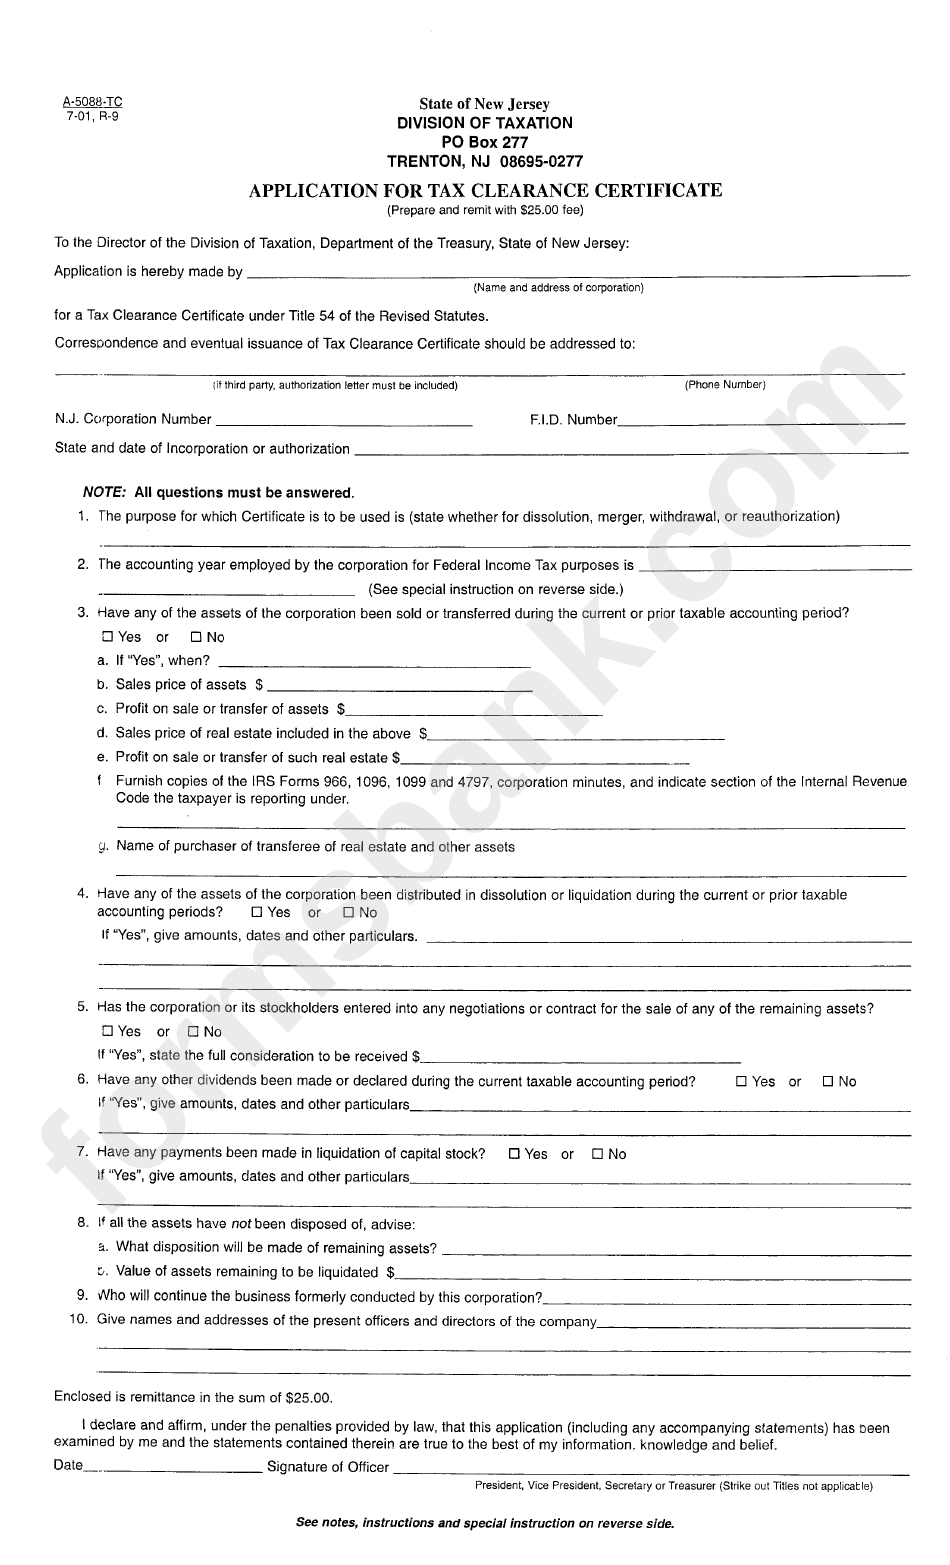 Form A-5088-Tc - Application For Tax Clearance Certificate ...